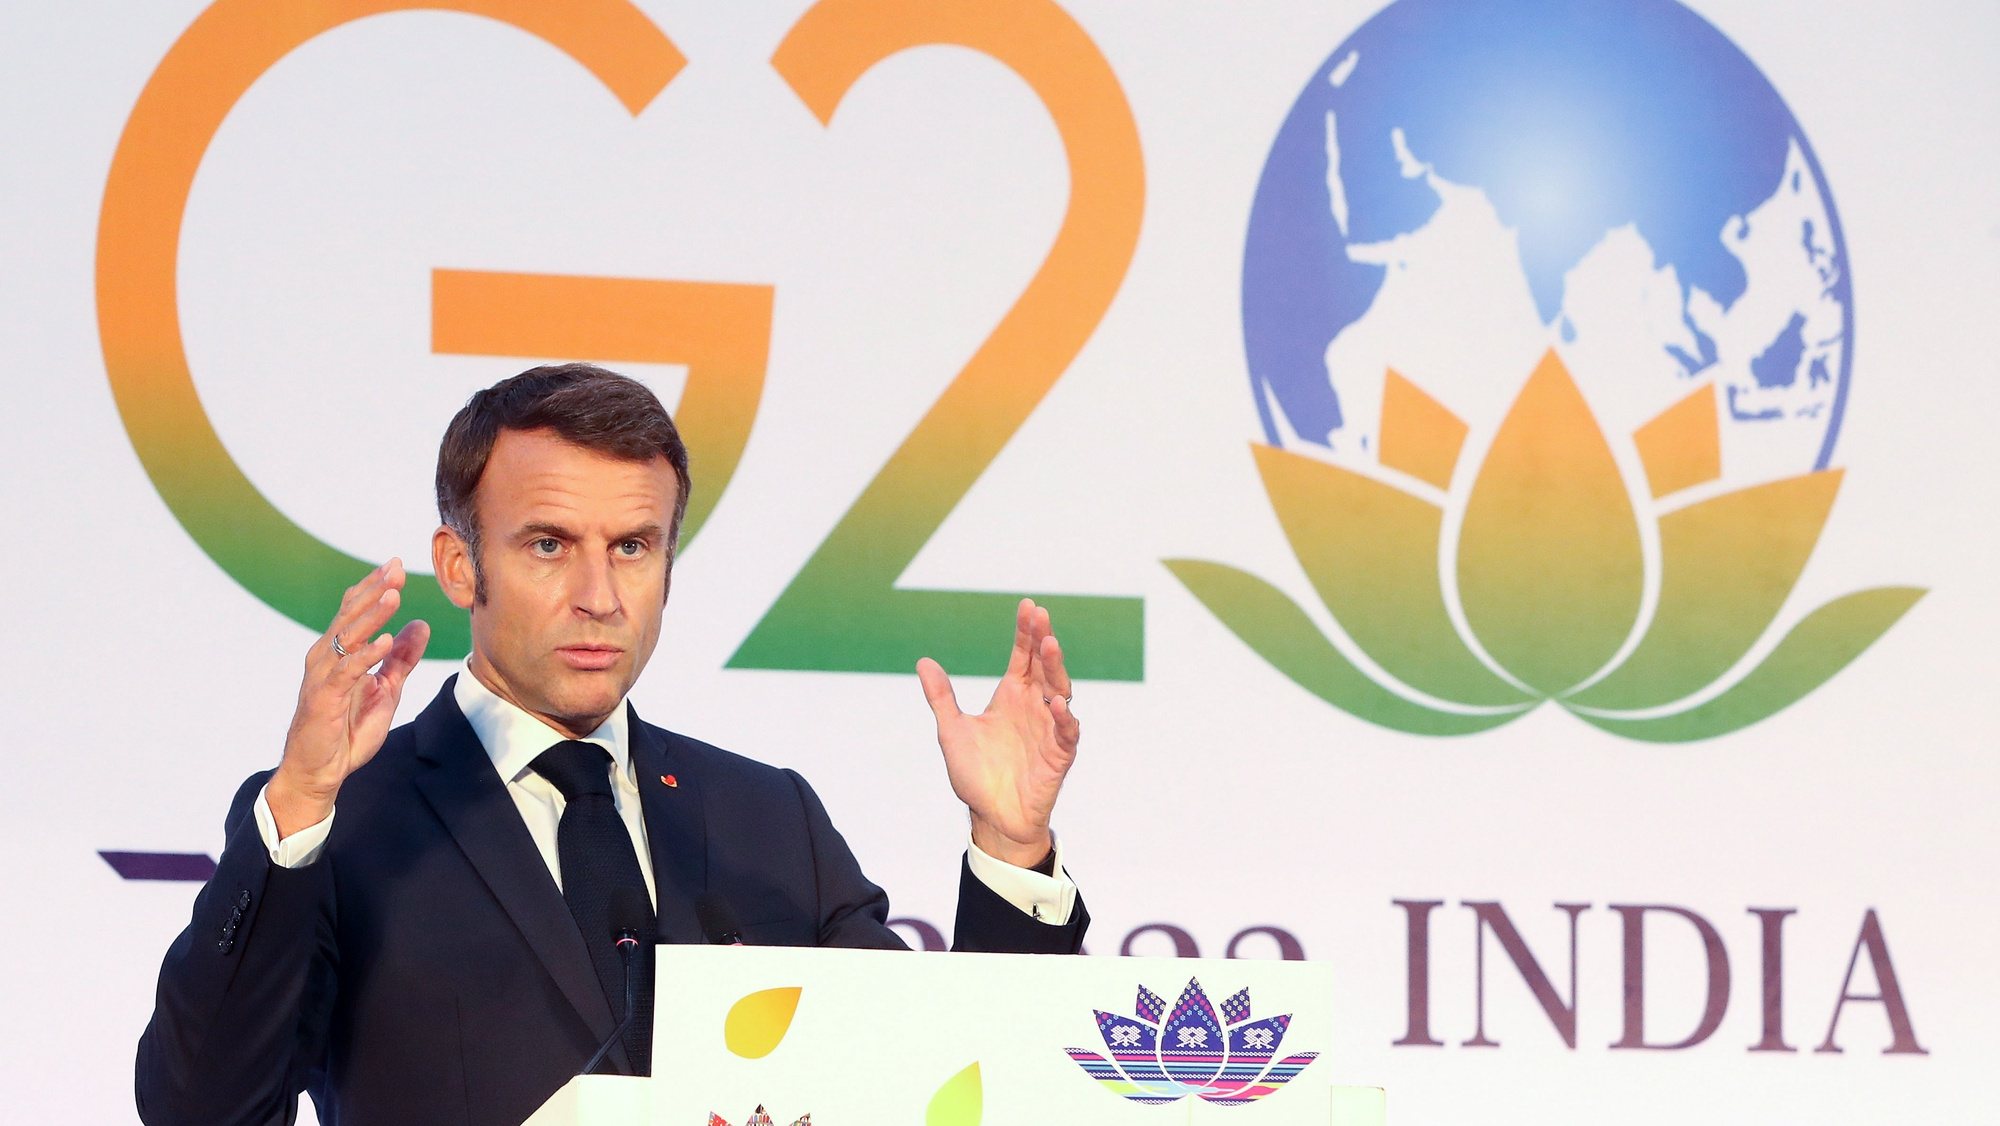 epa10852376 French President Emmanuel Macron addresses a press conference at the international media center during the G20 Summit in New Delhi, India, 10 September 2023. The G20 Heads of State and Government summit took place in the Indian capital on 09 and 10 September.  EPA/HARISH TYAGI